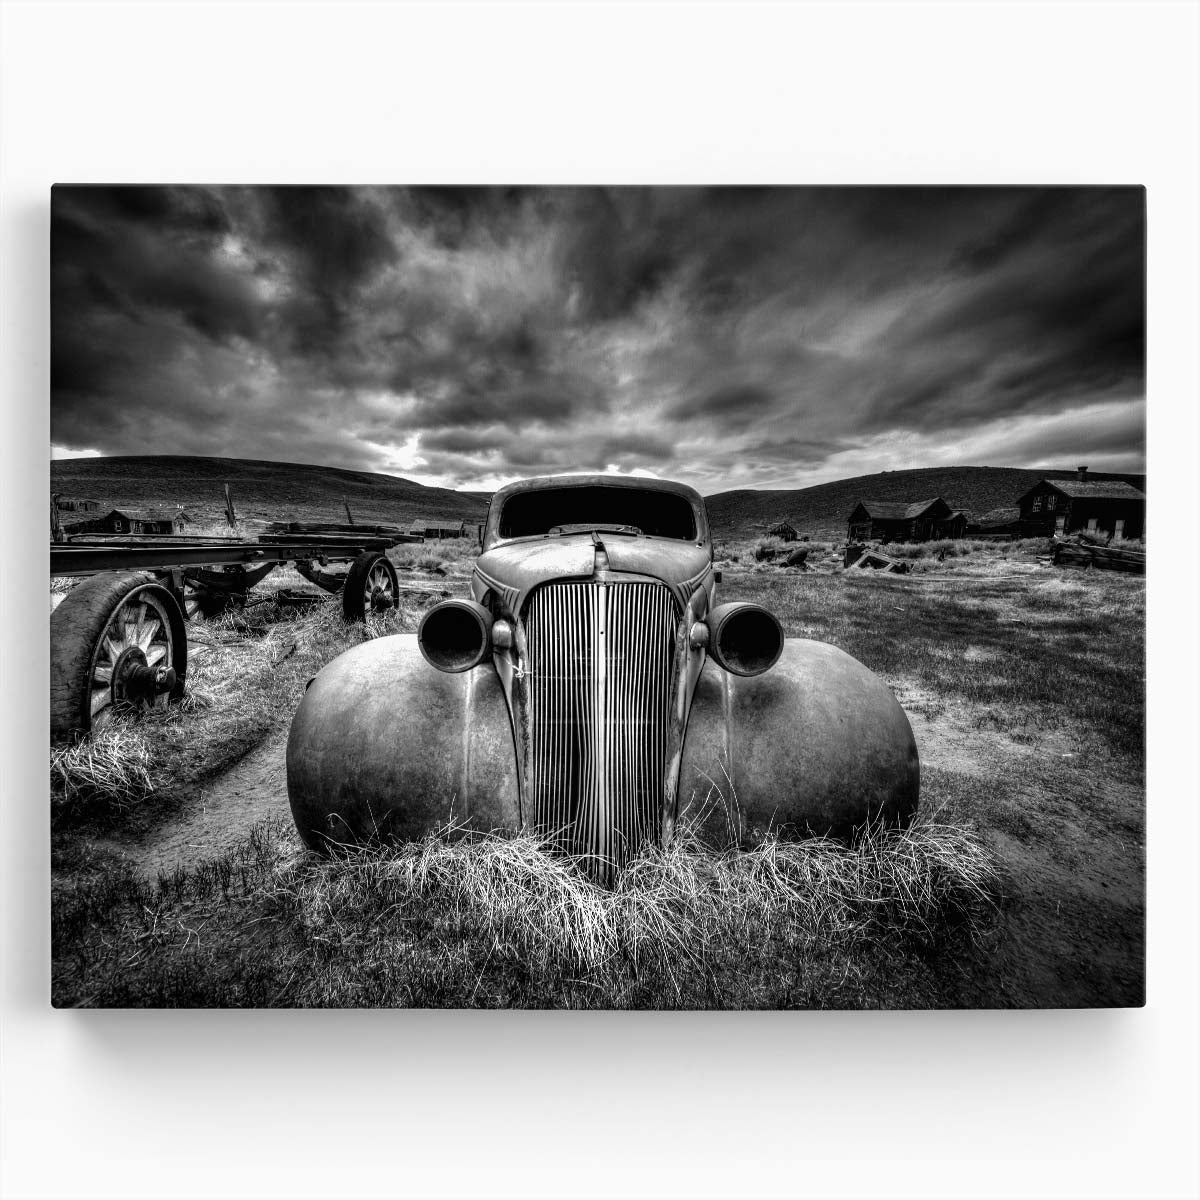 Vintage Car Decay in Monochrome Bodie, California Wall Art by Luxuriance Designs. Made in USA.